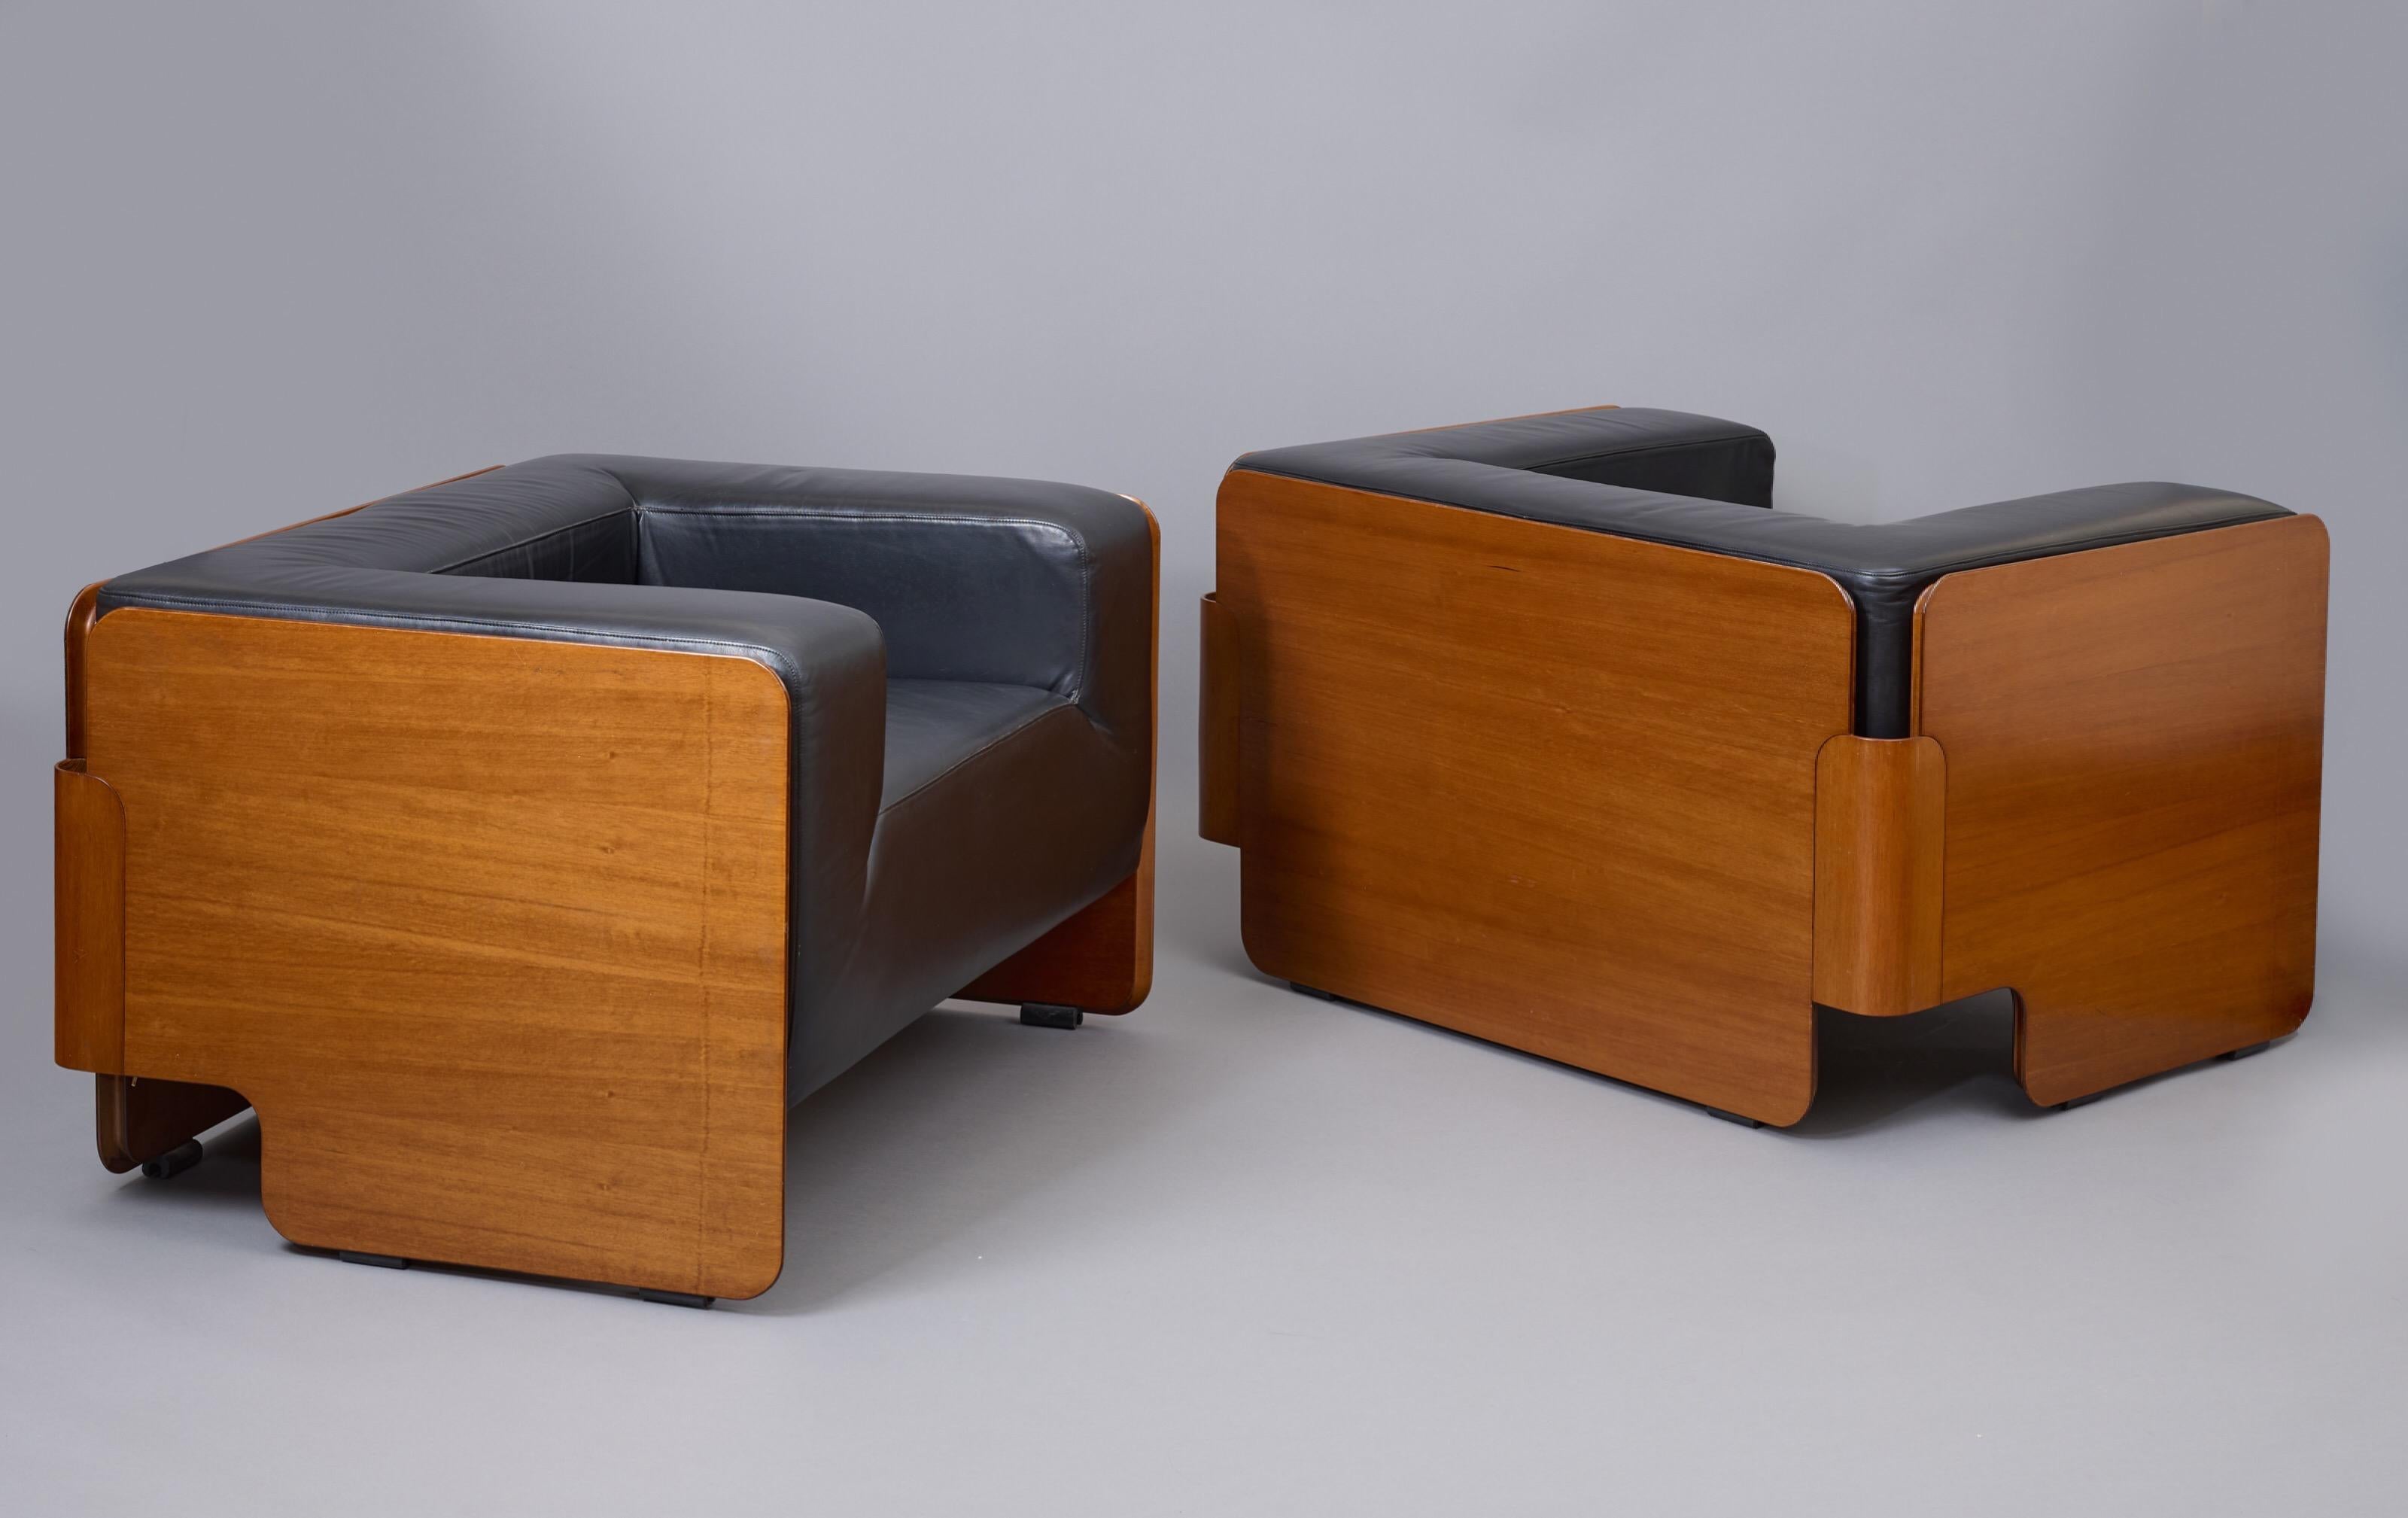 Imposing Modernist Pair of Leather and Walnut Club Chairs, Italy 1970s For Sale 2